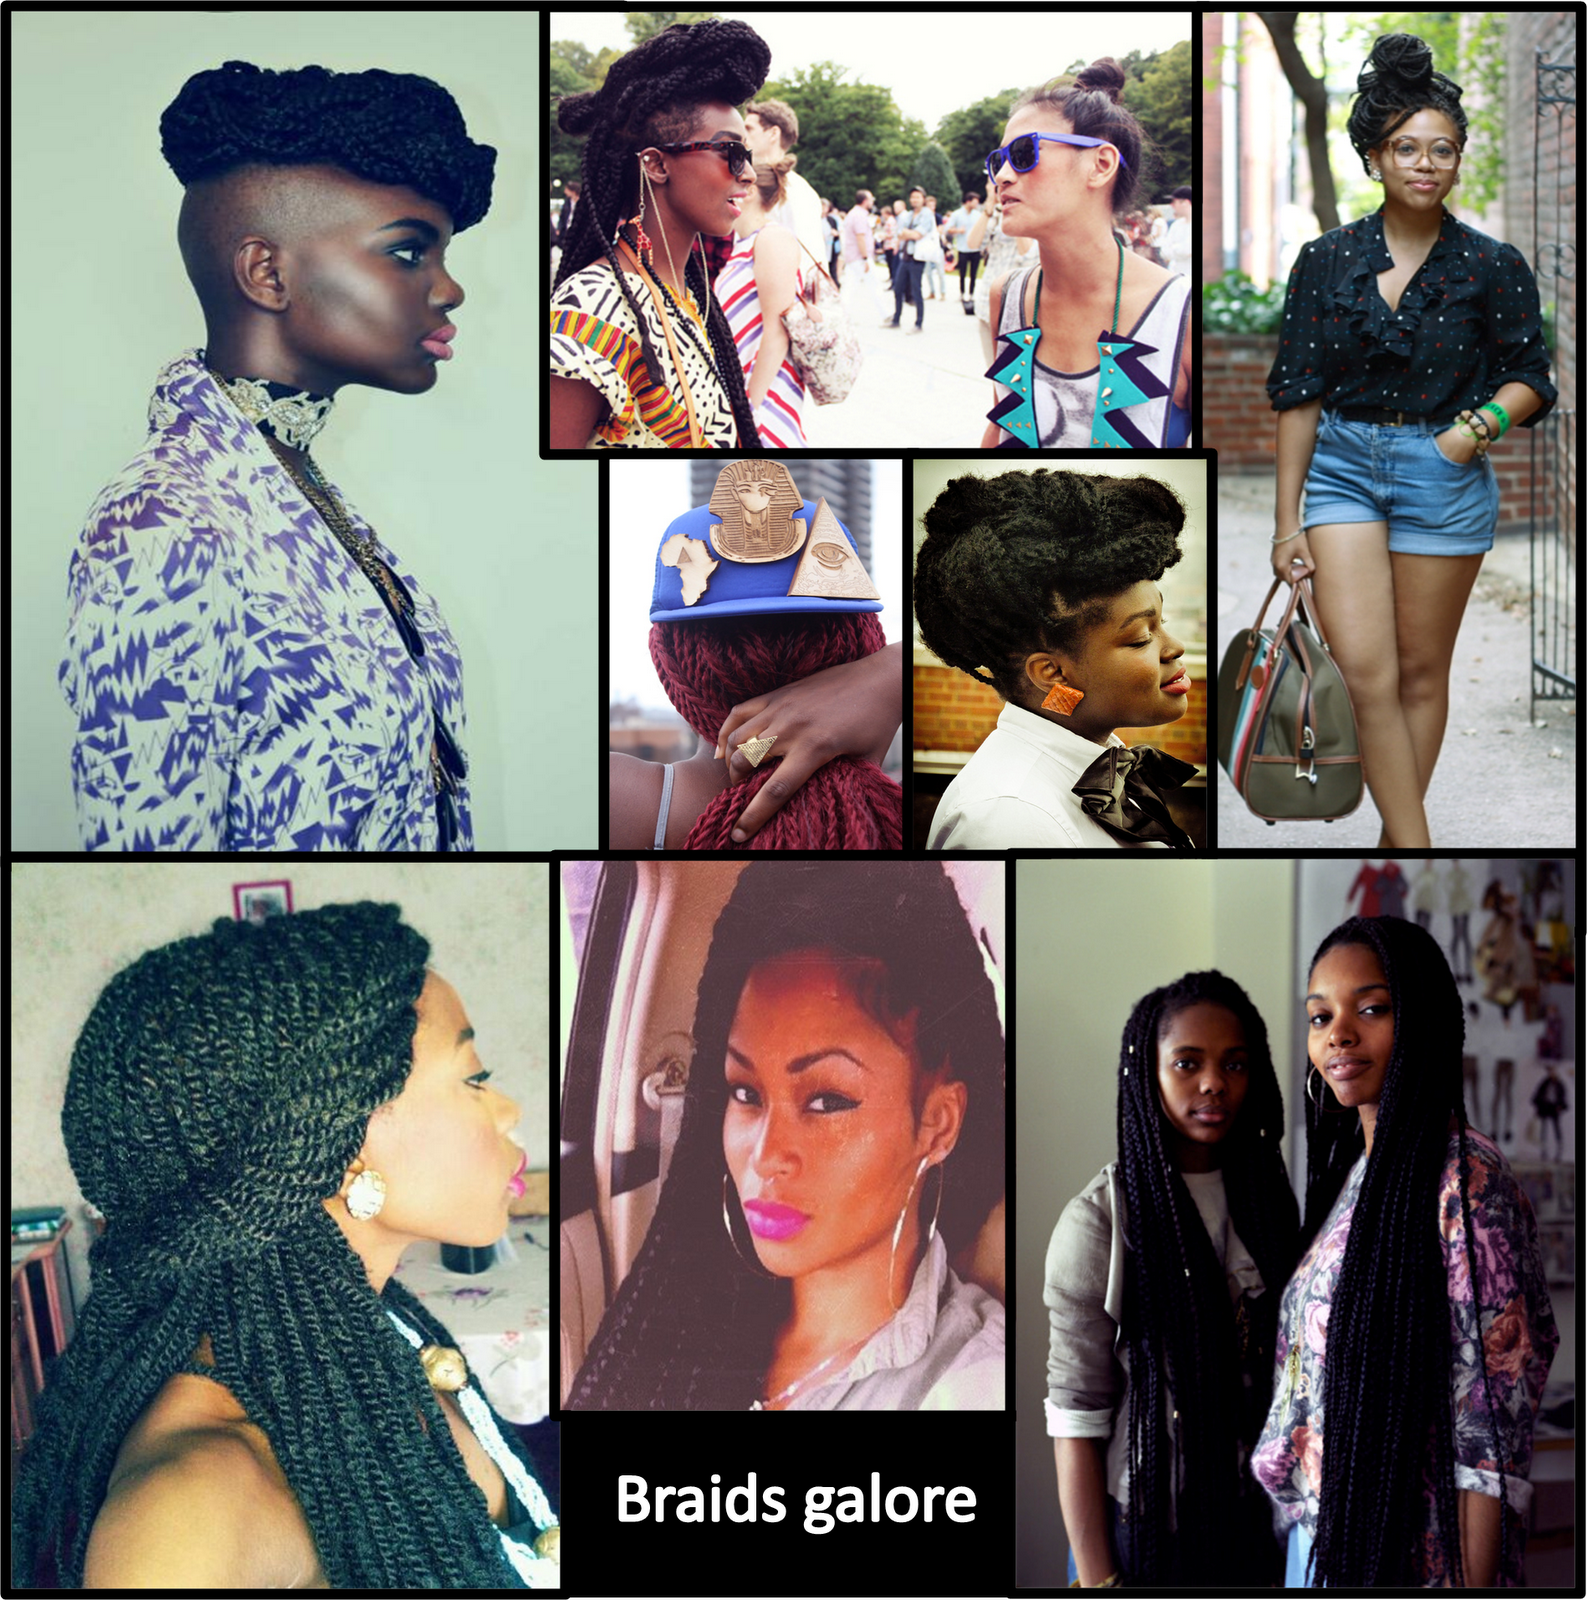 Micro Pictures Of Braids Hairstyles Of 2012 Posted by ChiChi at 2:25 AM